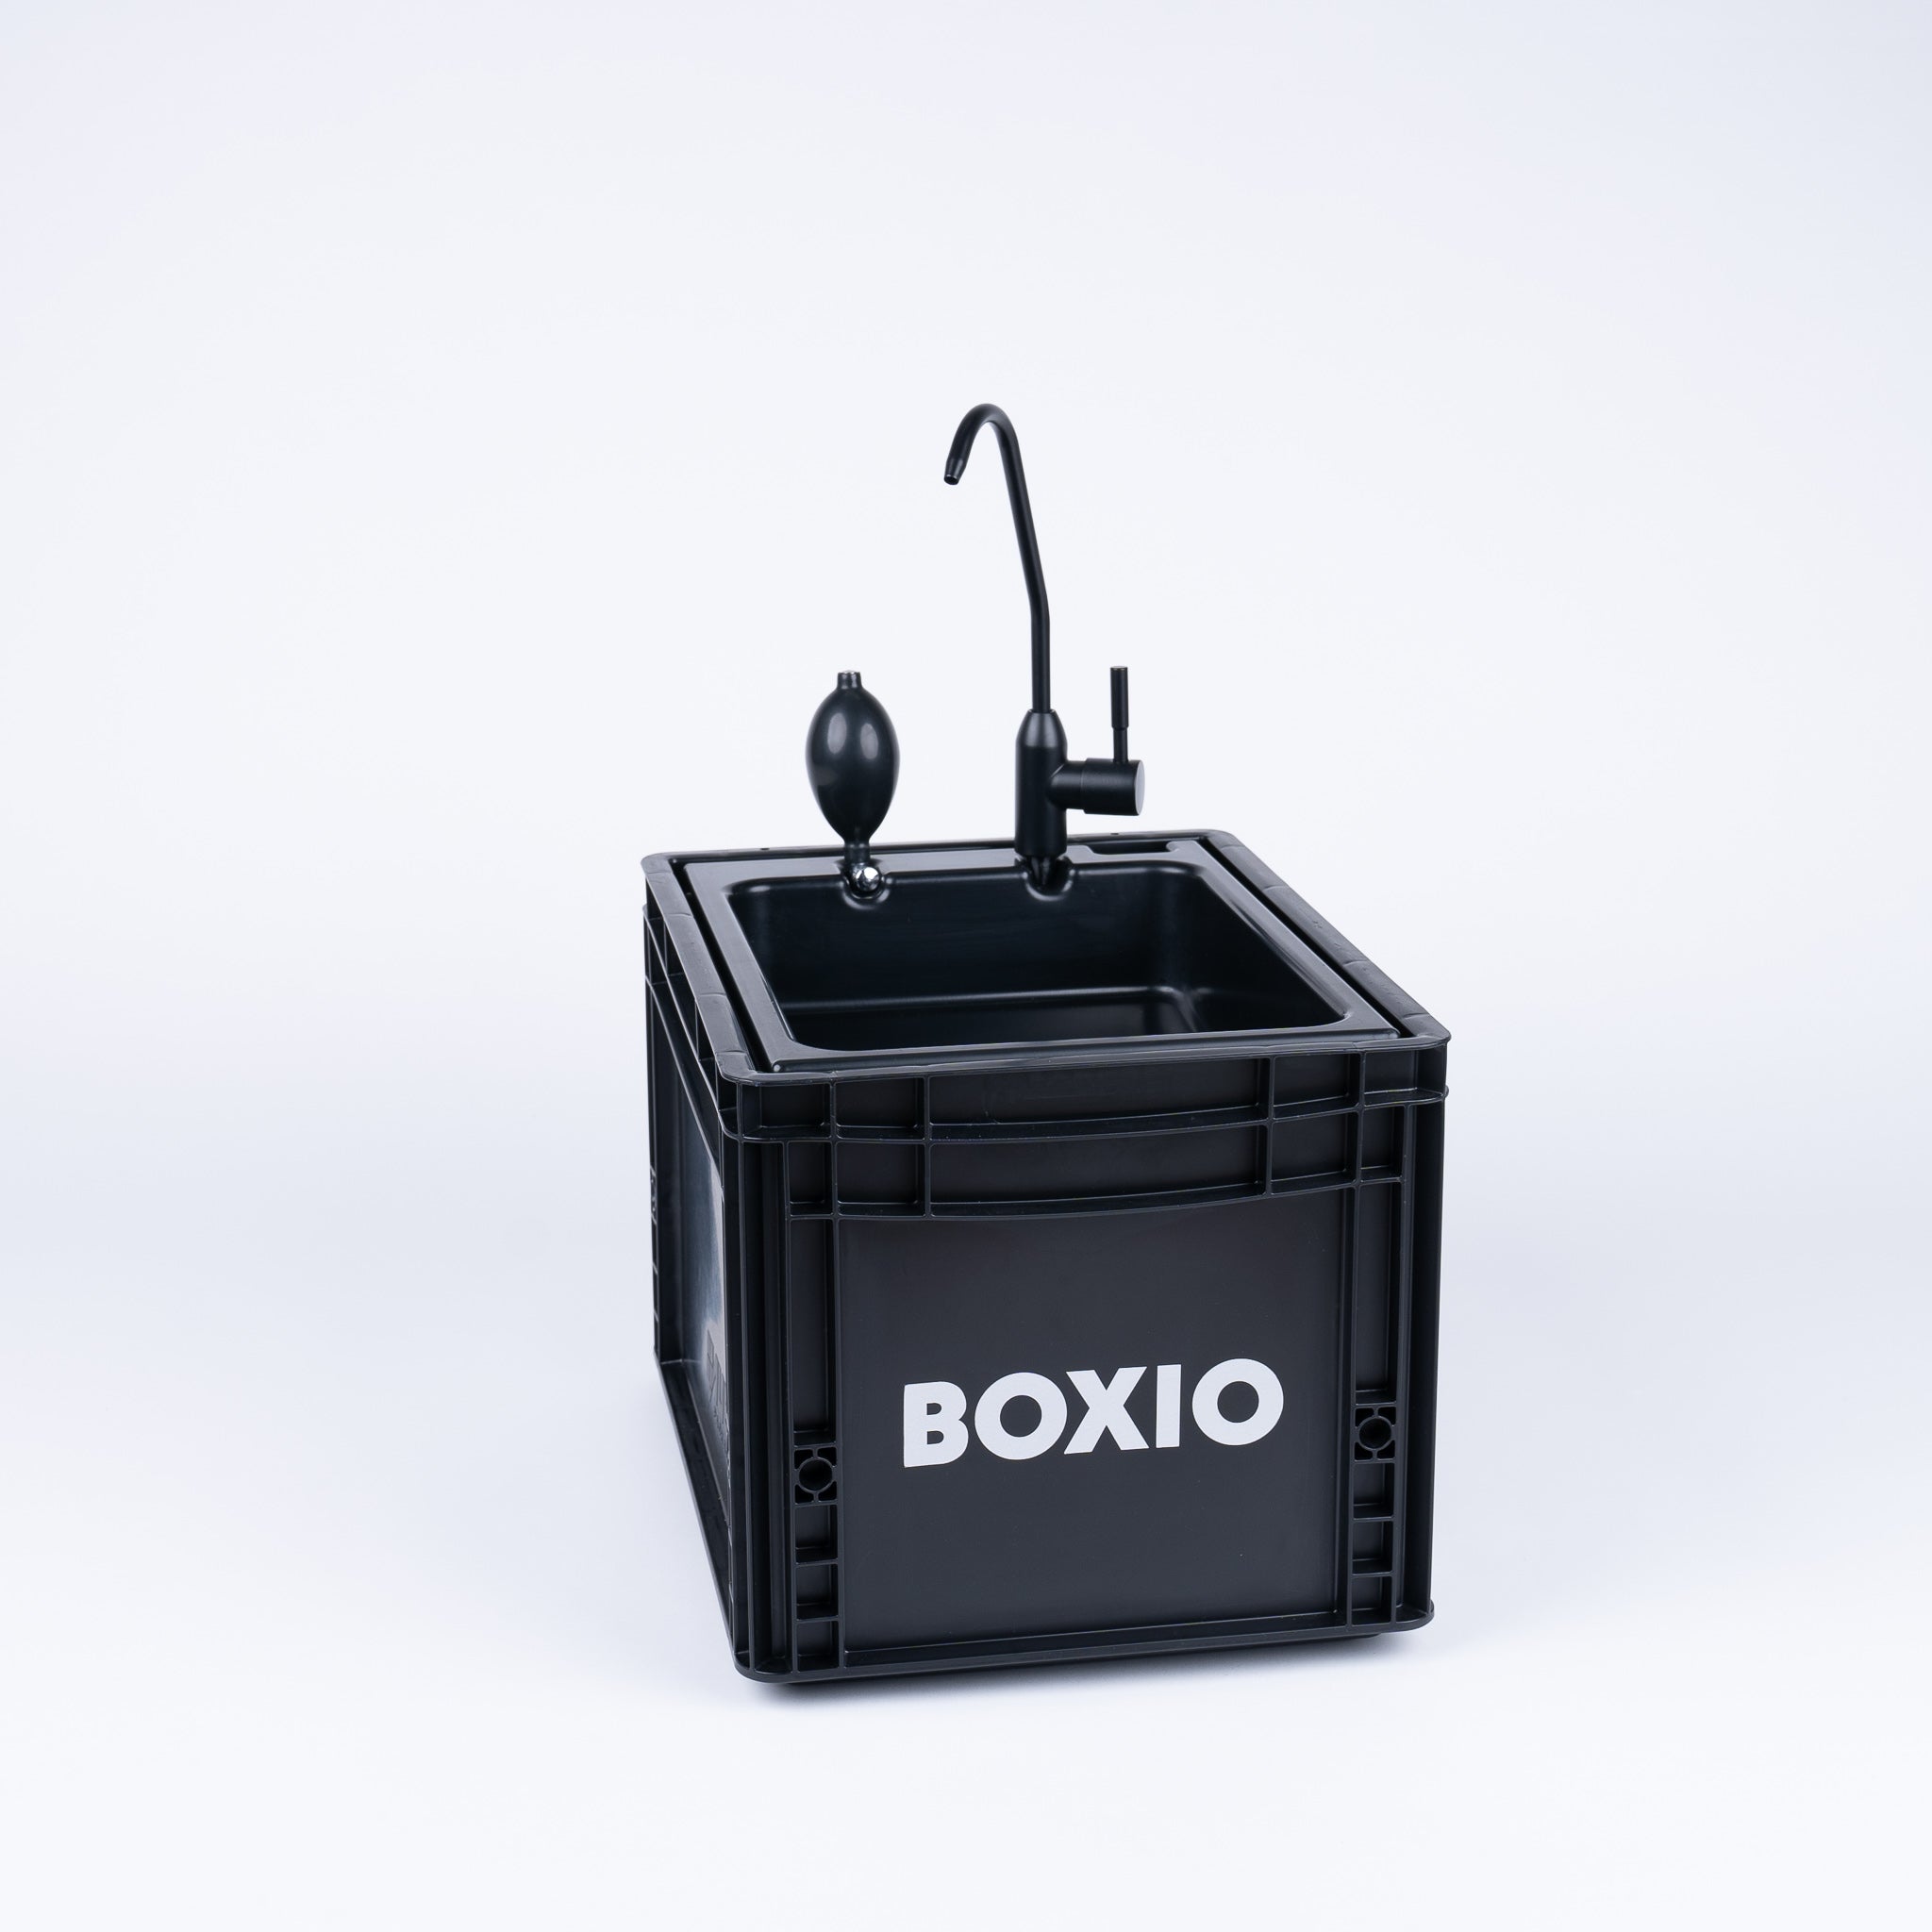 BOXIO - SANITARY: Complete set with urine-diverting toilet, mobile washbasin and accessories